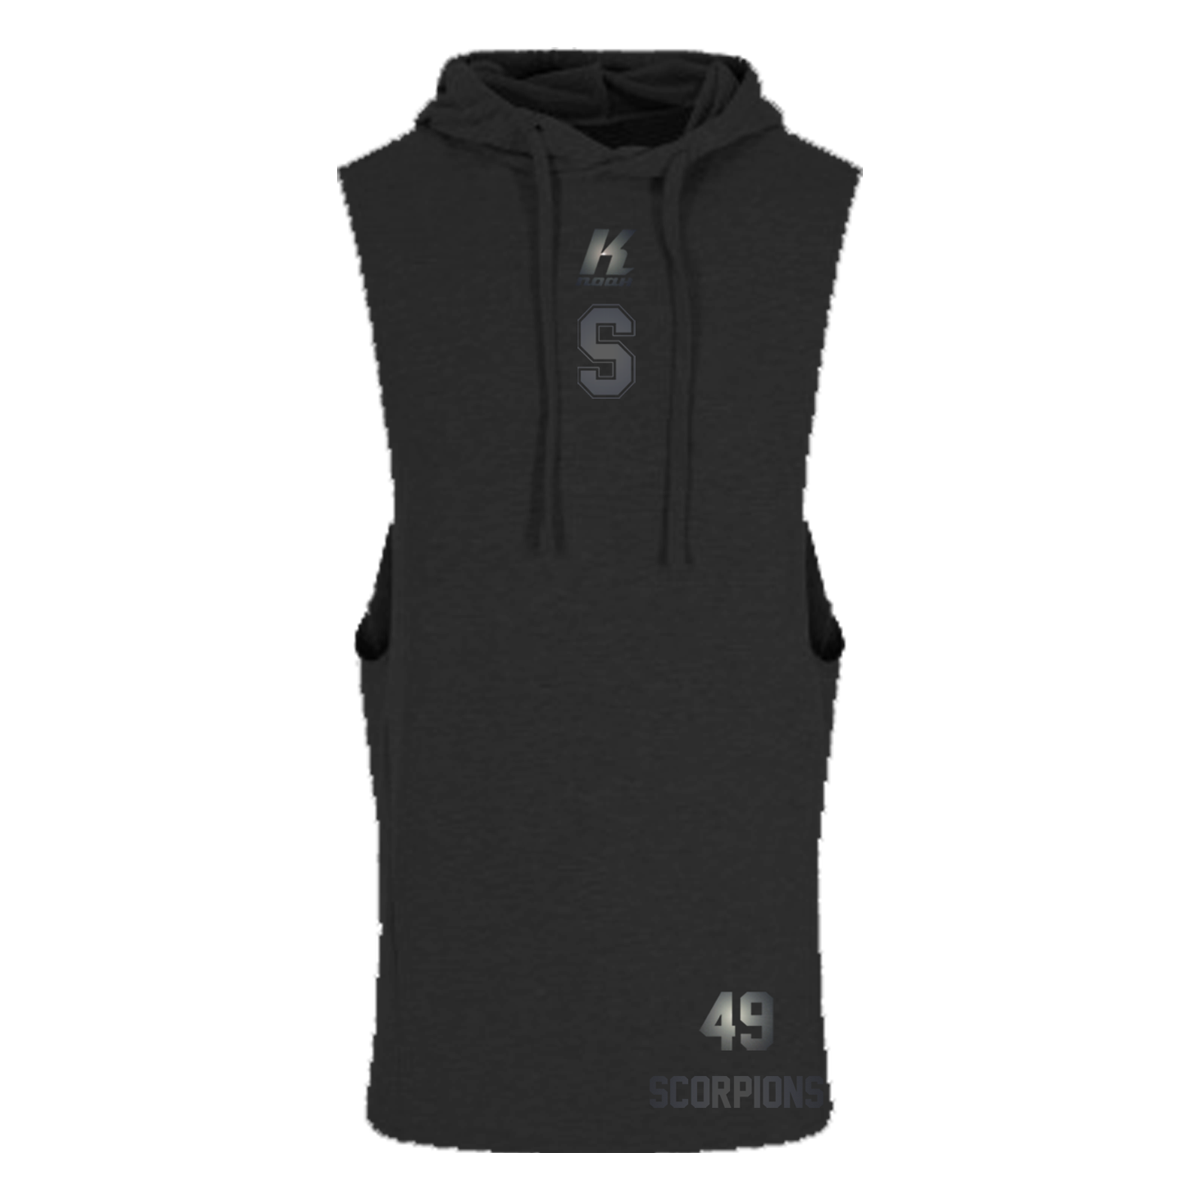 Scorpions "Blackline" Sleeveless Muscle Hoodie JC053 with Playernumber or Initials